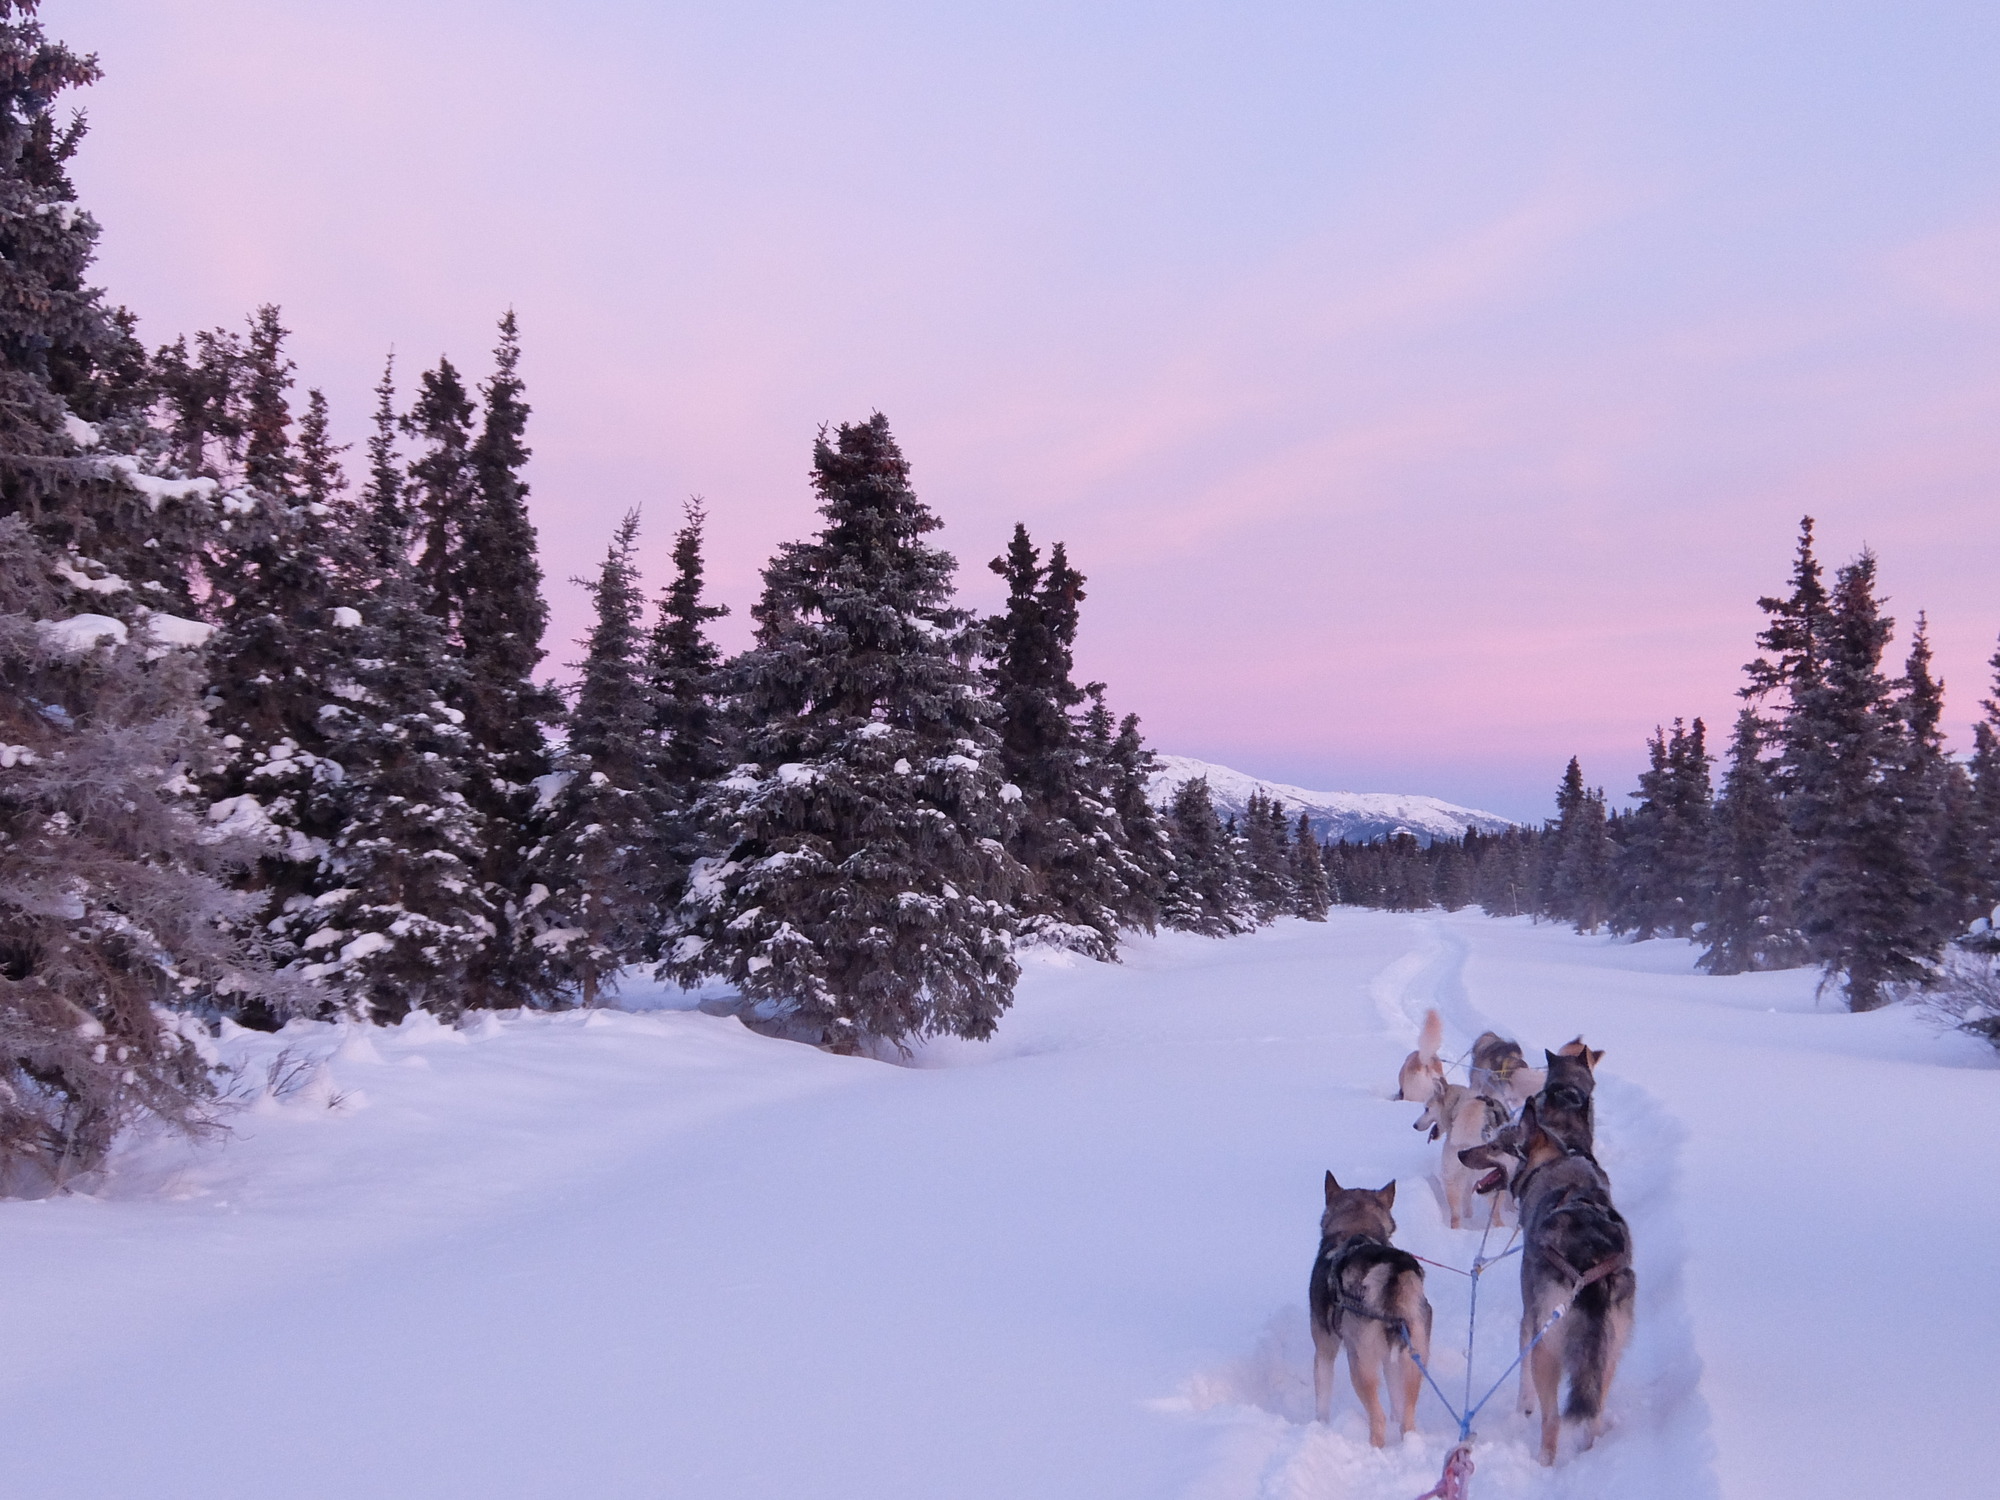 a dog team in a snowy forest under a pink sky